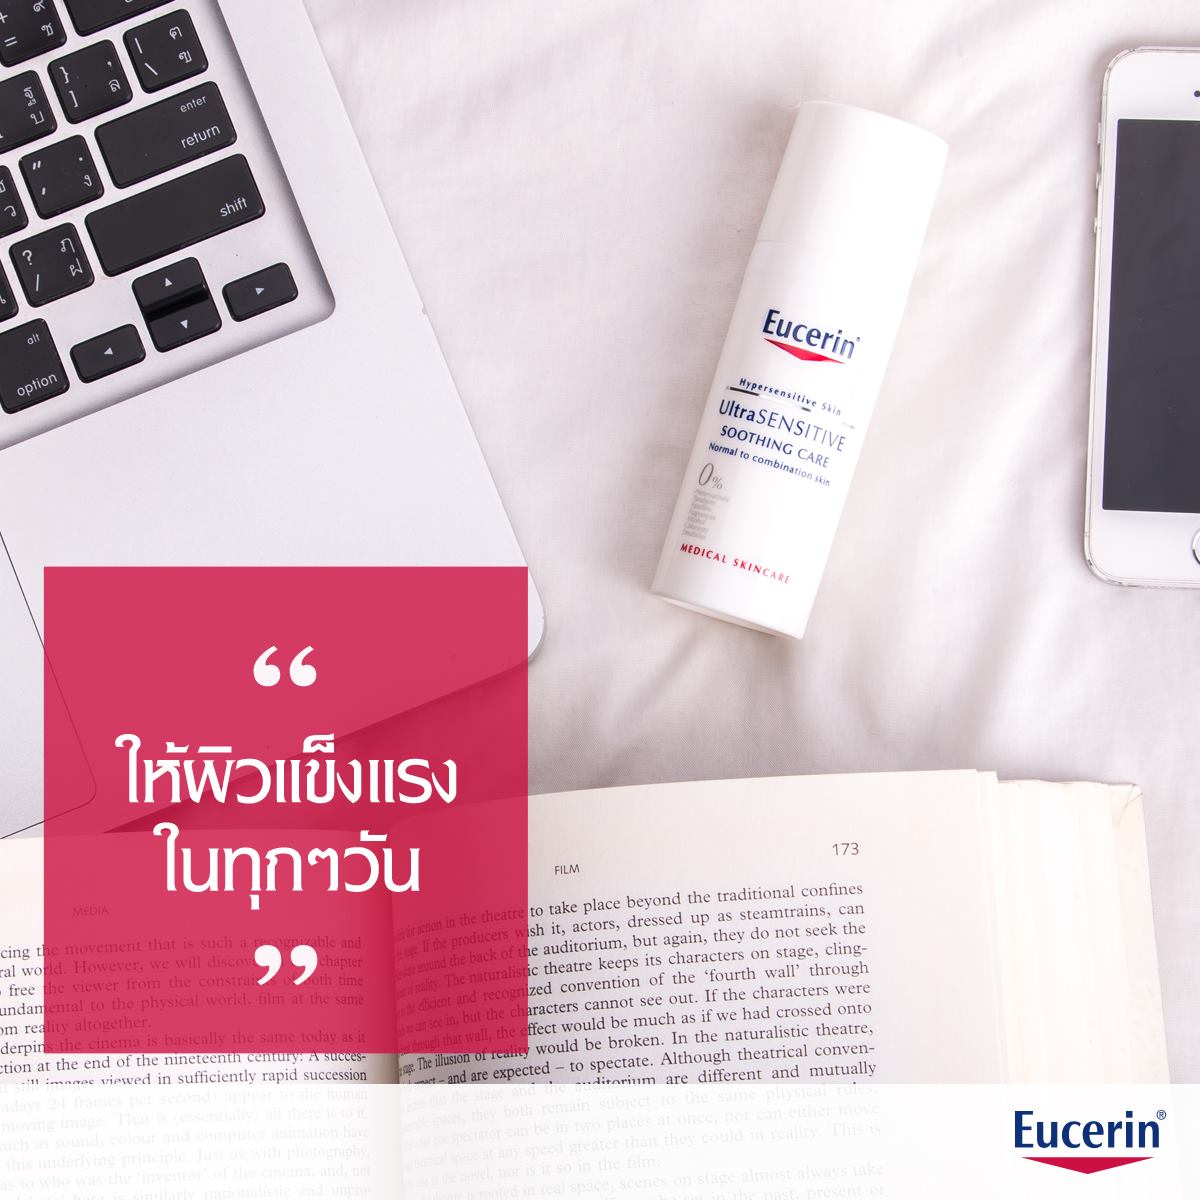  Eucerin UltraSENSITIVE Soothing Care